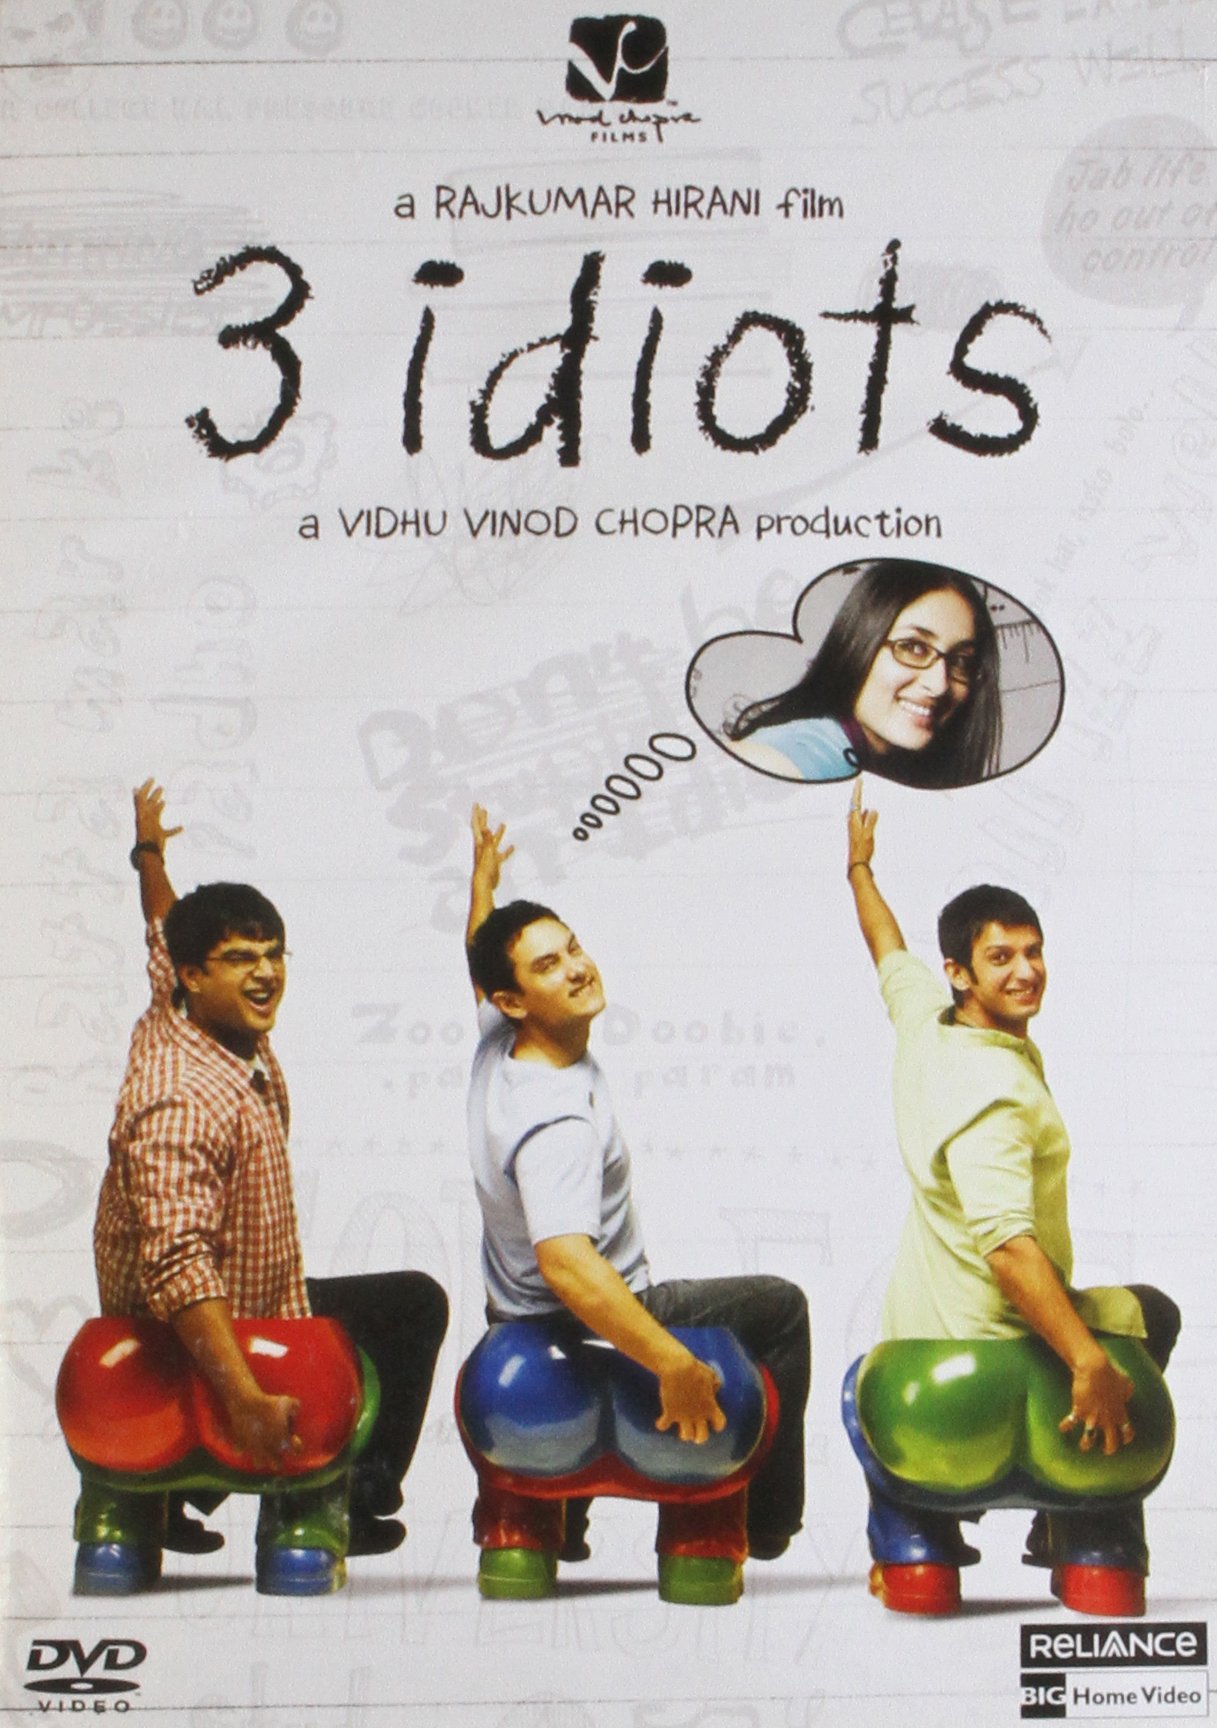 3-idiots-movie-purchase-or-watch-online